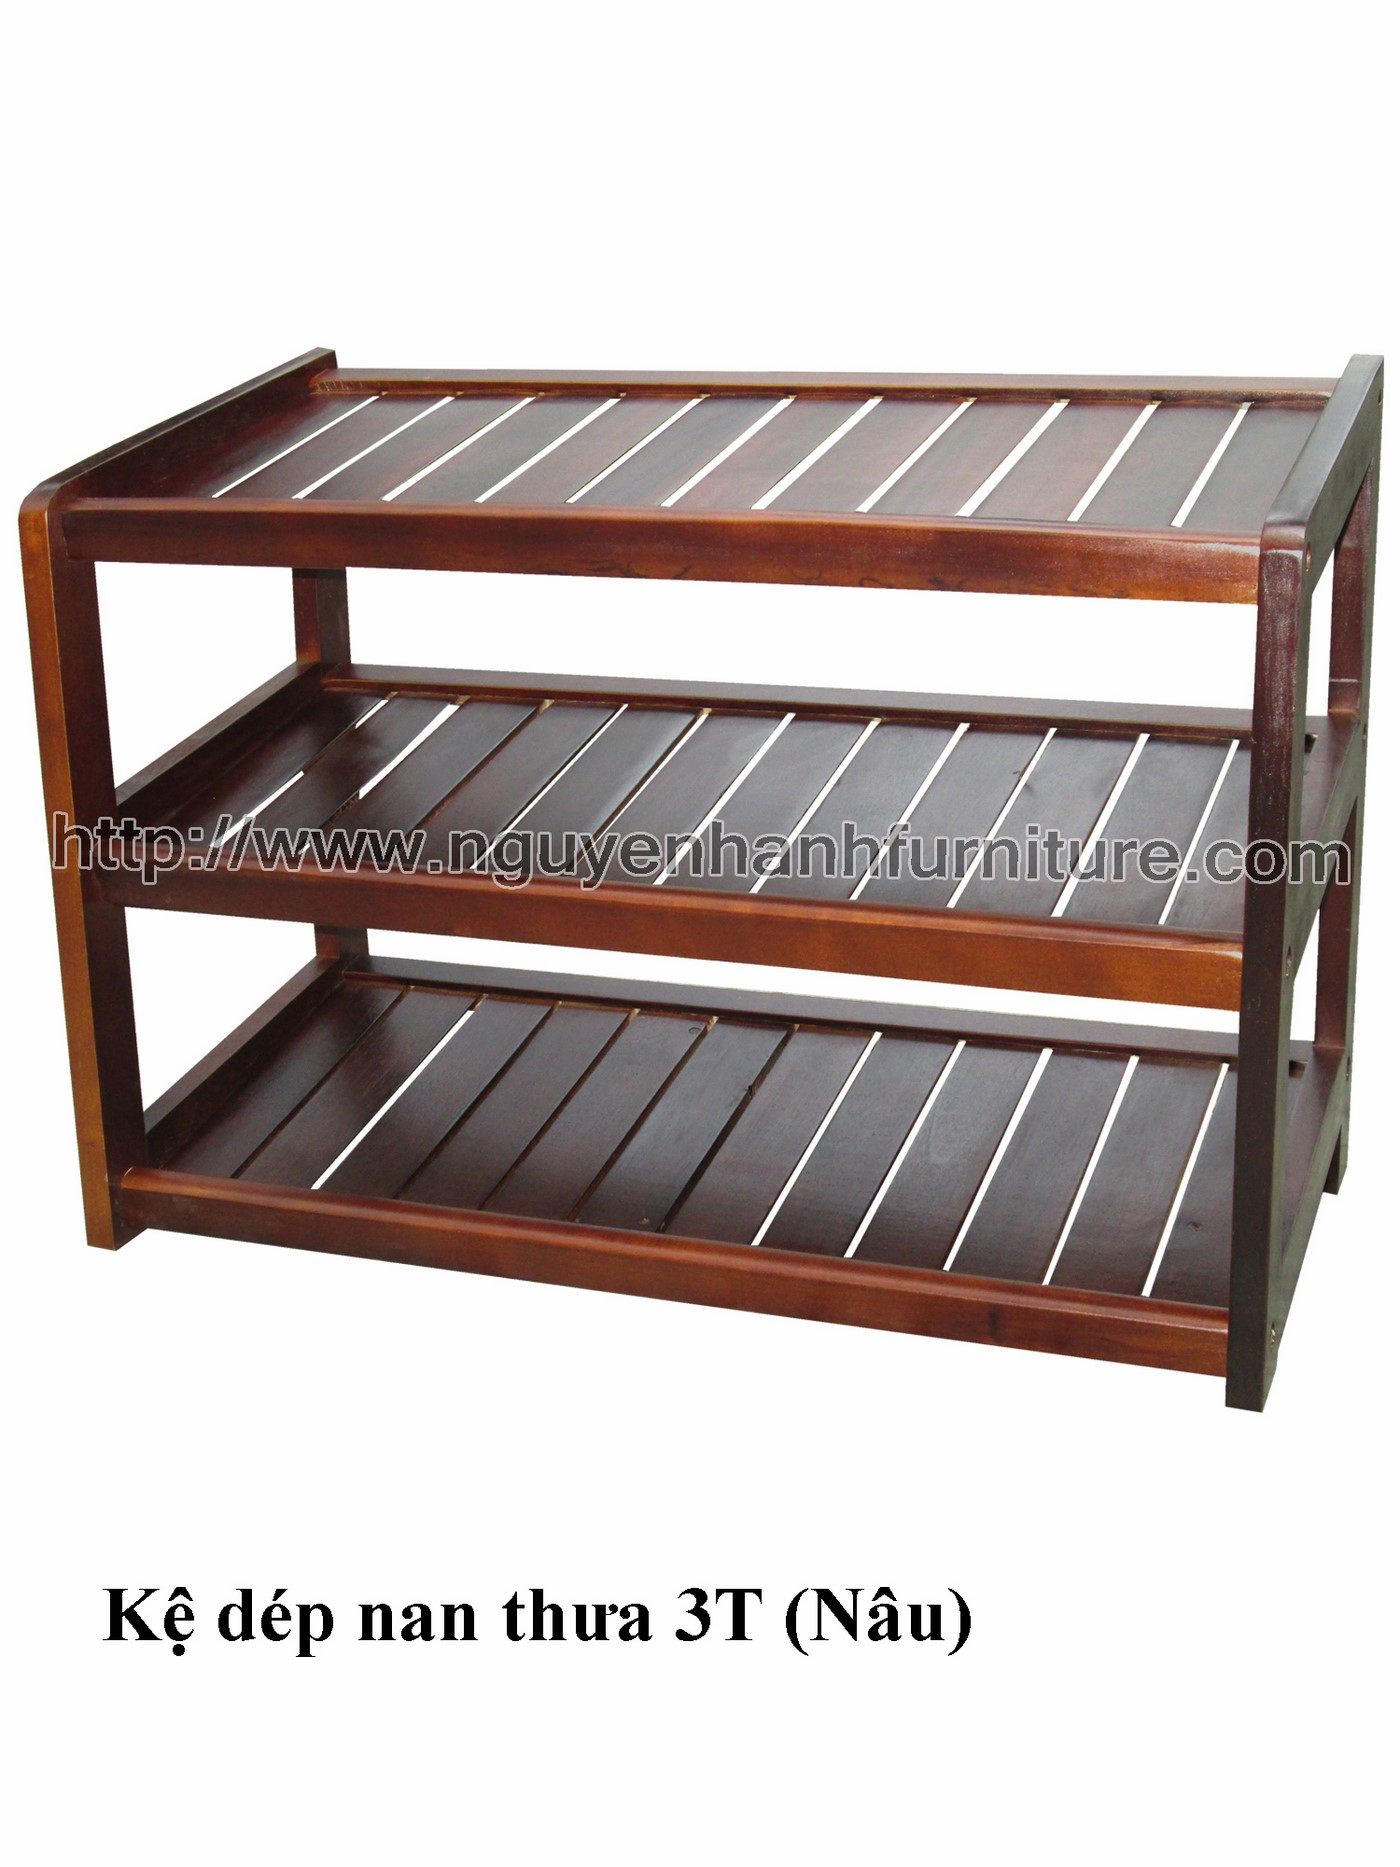 Name product: 3 storey Shoeshelf with sparse blades (Brown) - Dimensions: 62 x 30 x 45 (H) - Description: Wood natural rubber